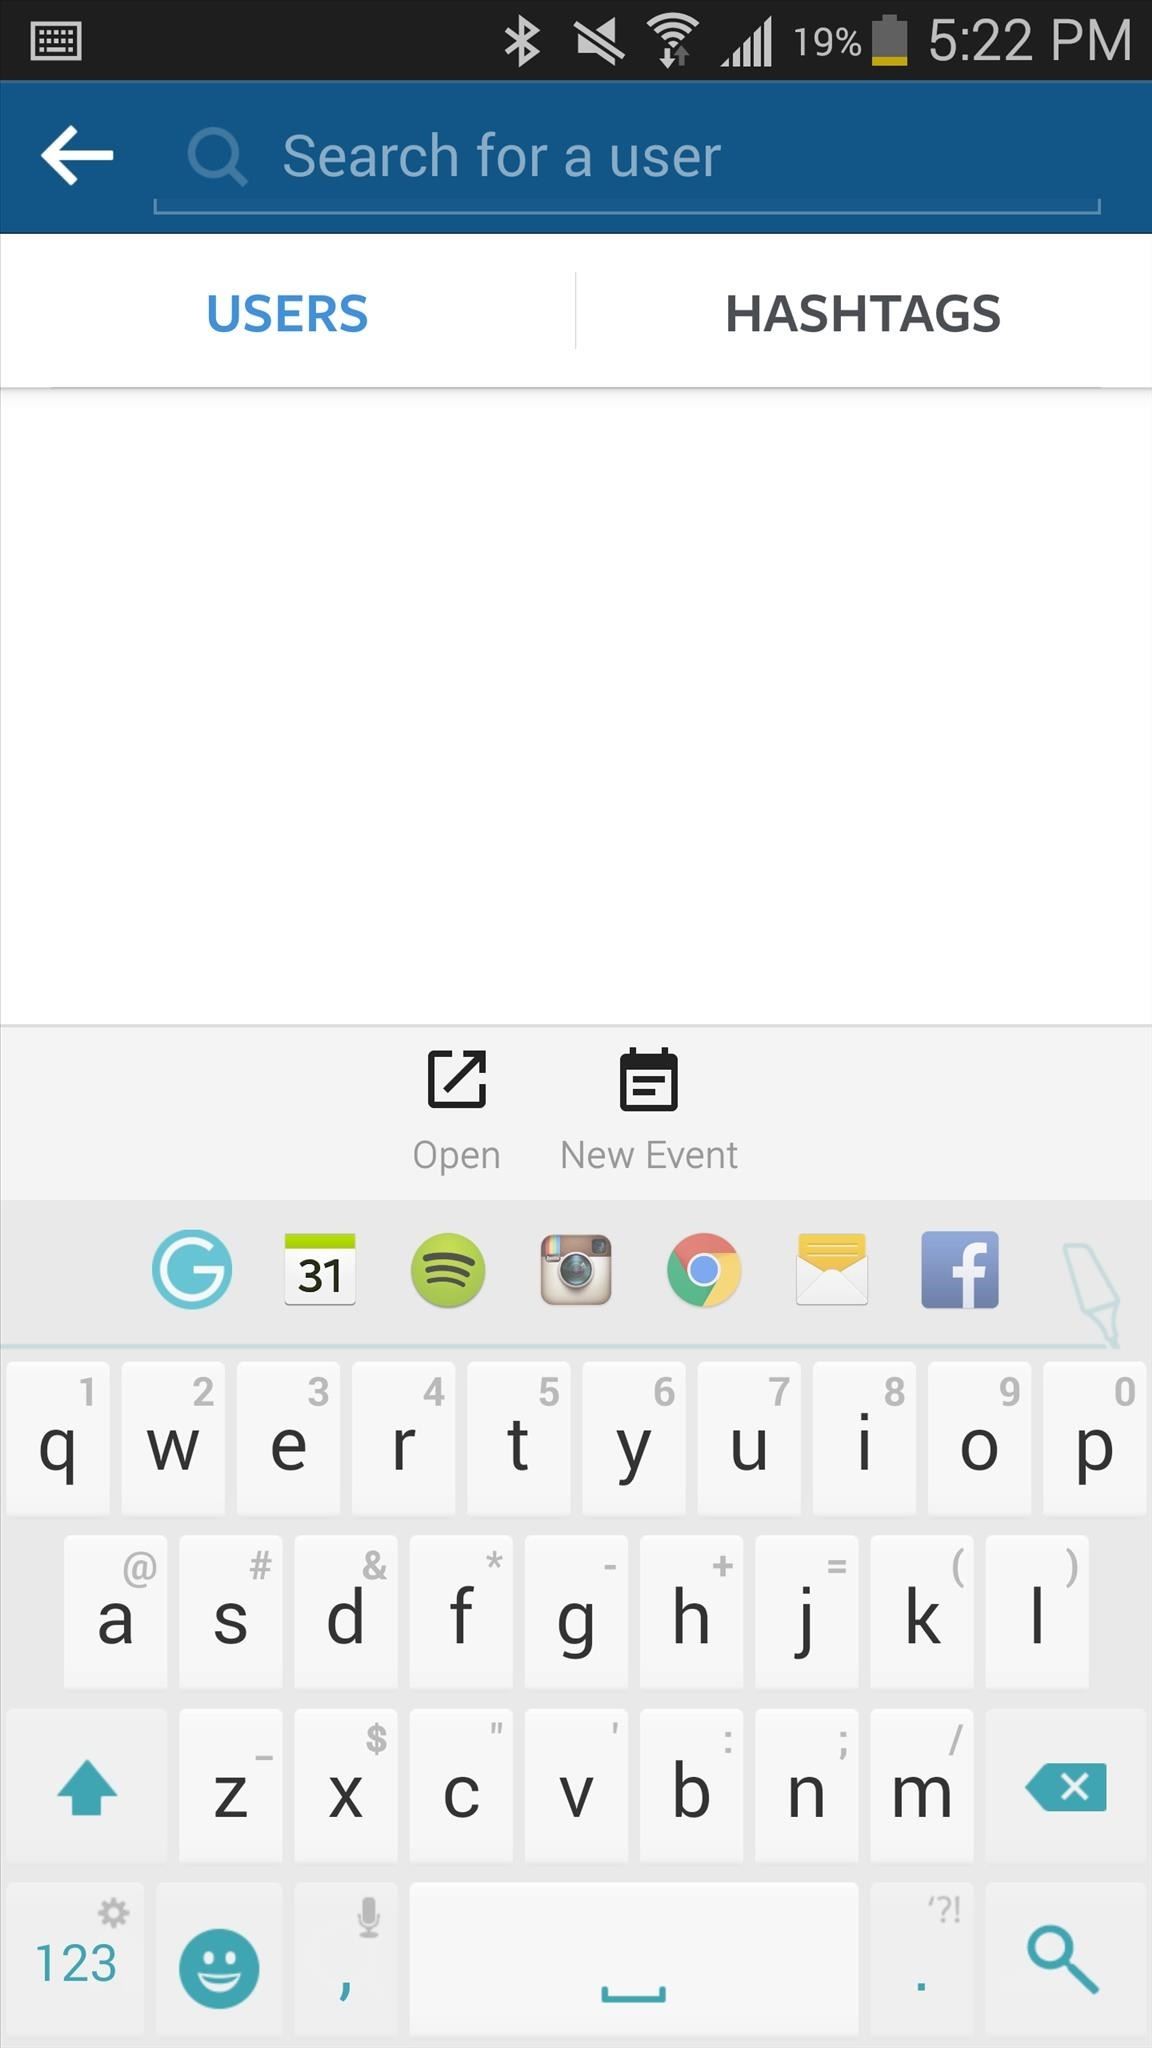 Switch Apps Directly from the Keyboard on Any Android Device